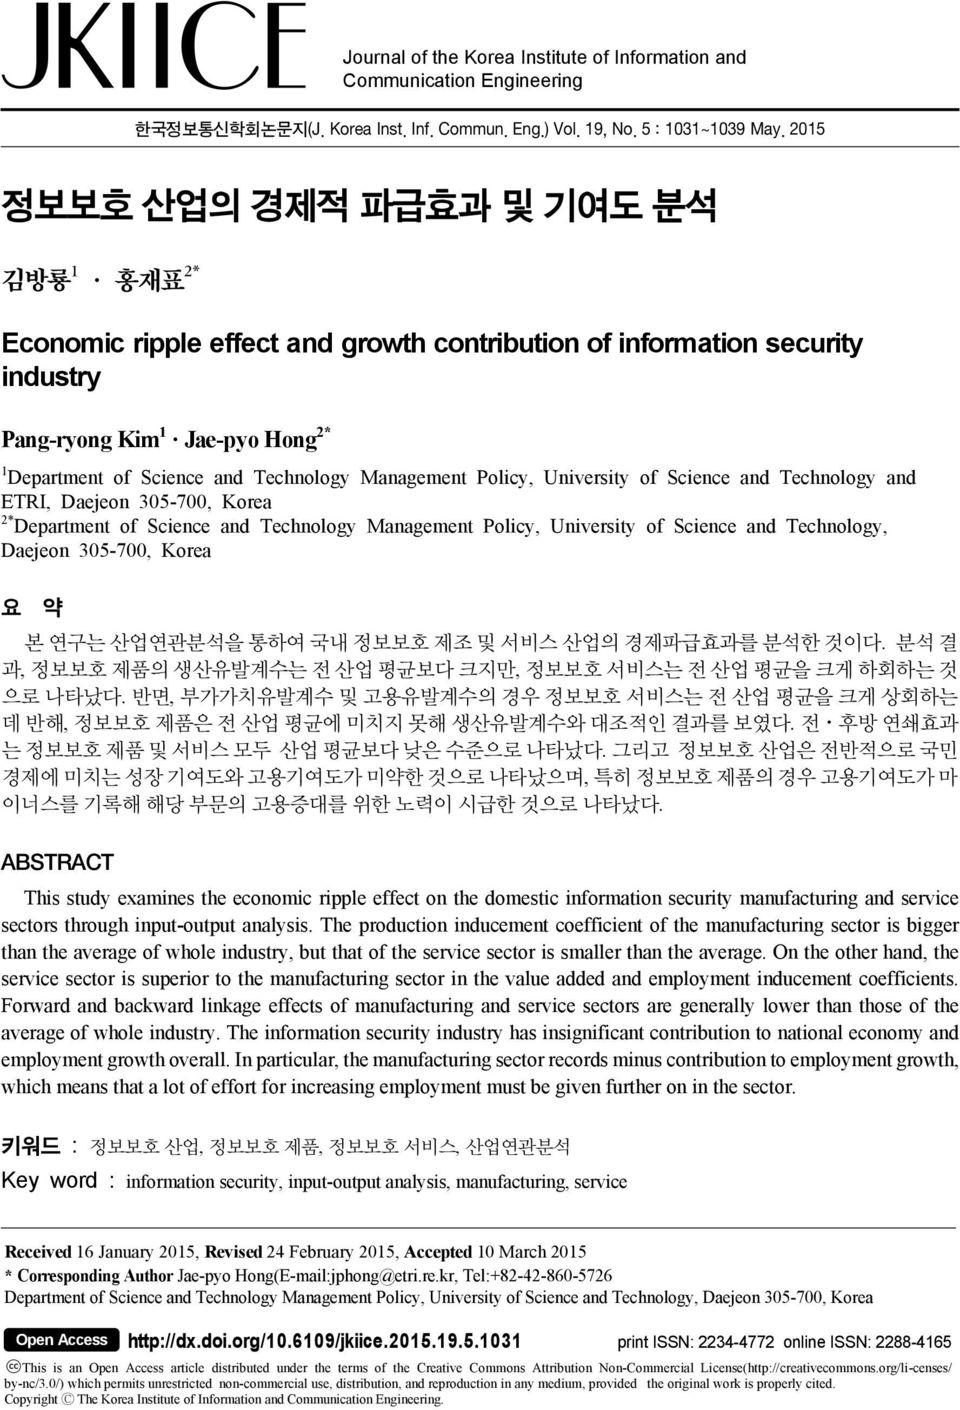 Management Policy, University of Science and Technology and ETRI, Daejeon 305-700, Korea 2* Department of Science and Technology Management Policy, University of Science and Technology, Daejeon